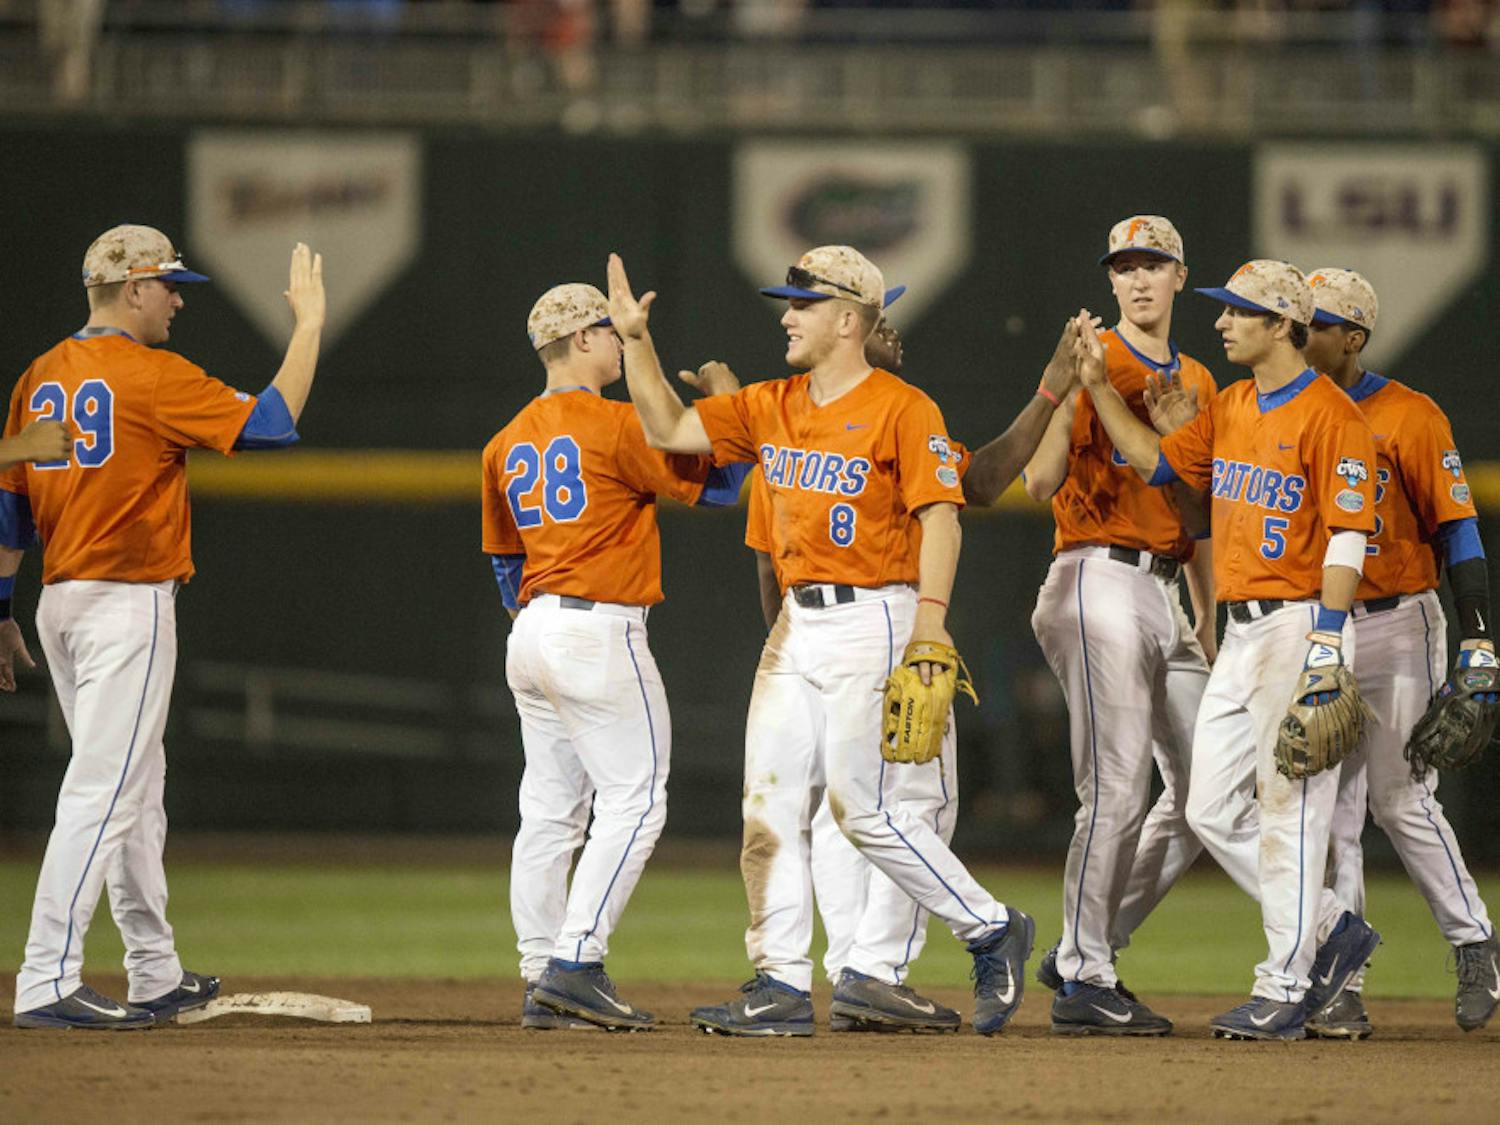 Florida players celebrate following the Gators' 10-2 victory against Miami in the NCAA Men's College World Series on Wednesday, June 17, 2015 at TD Ameritrade Park in Omaha, Nebraska